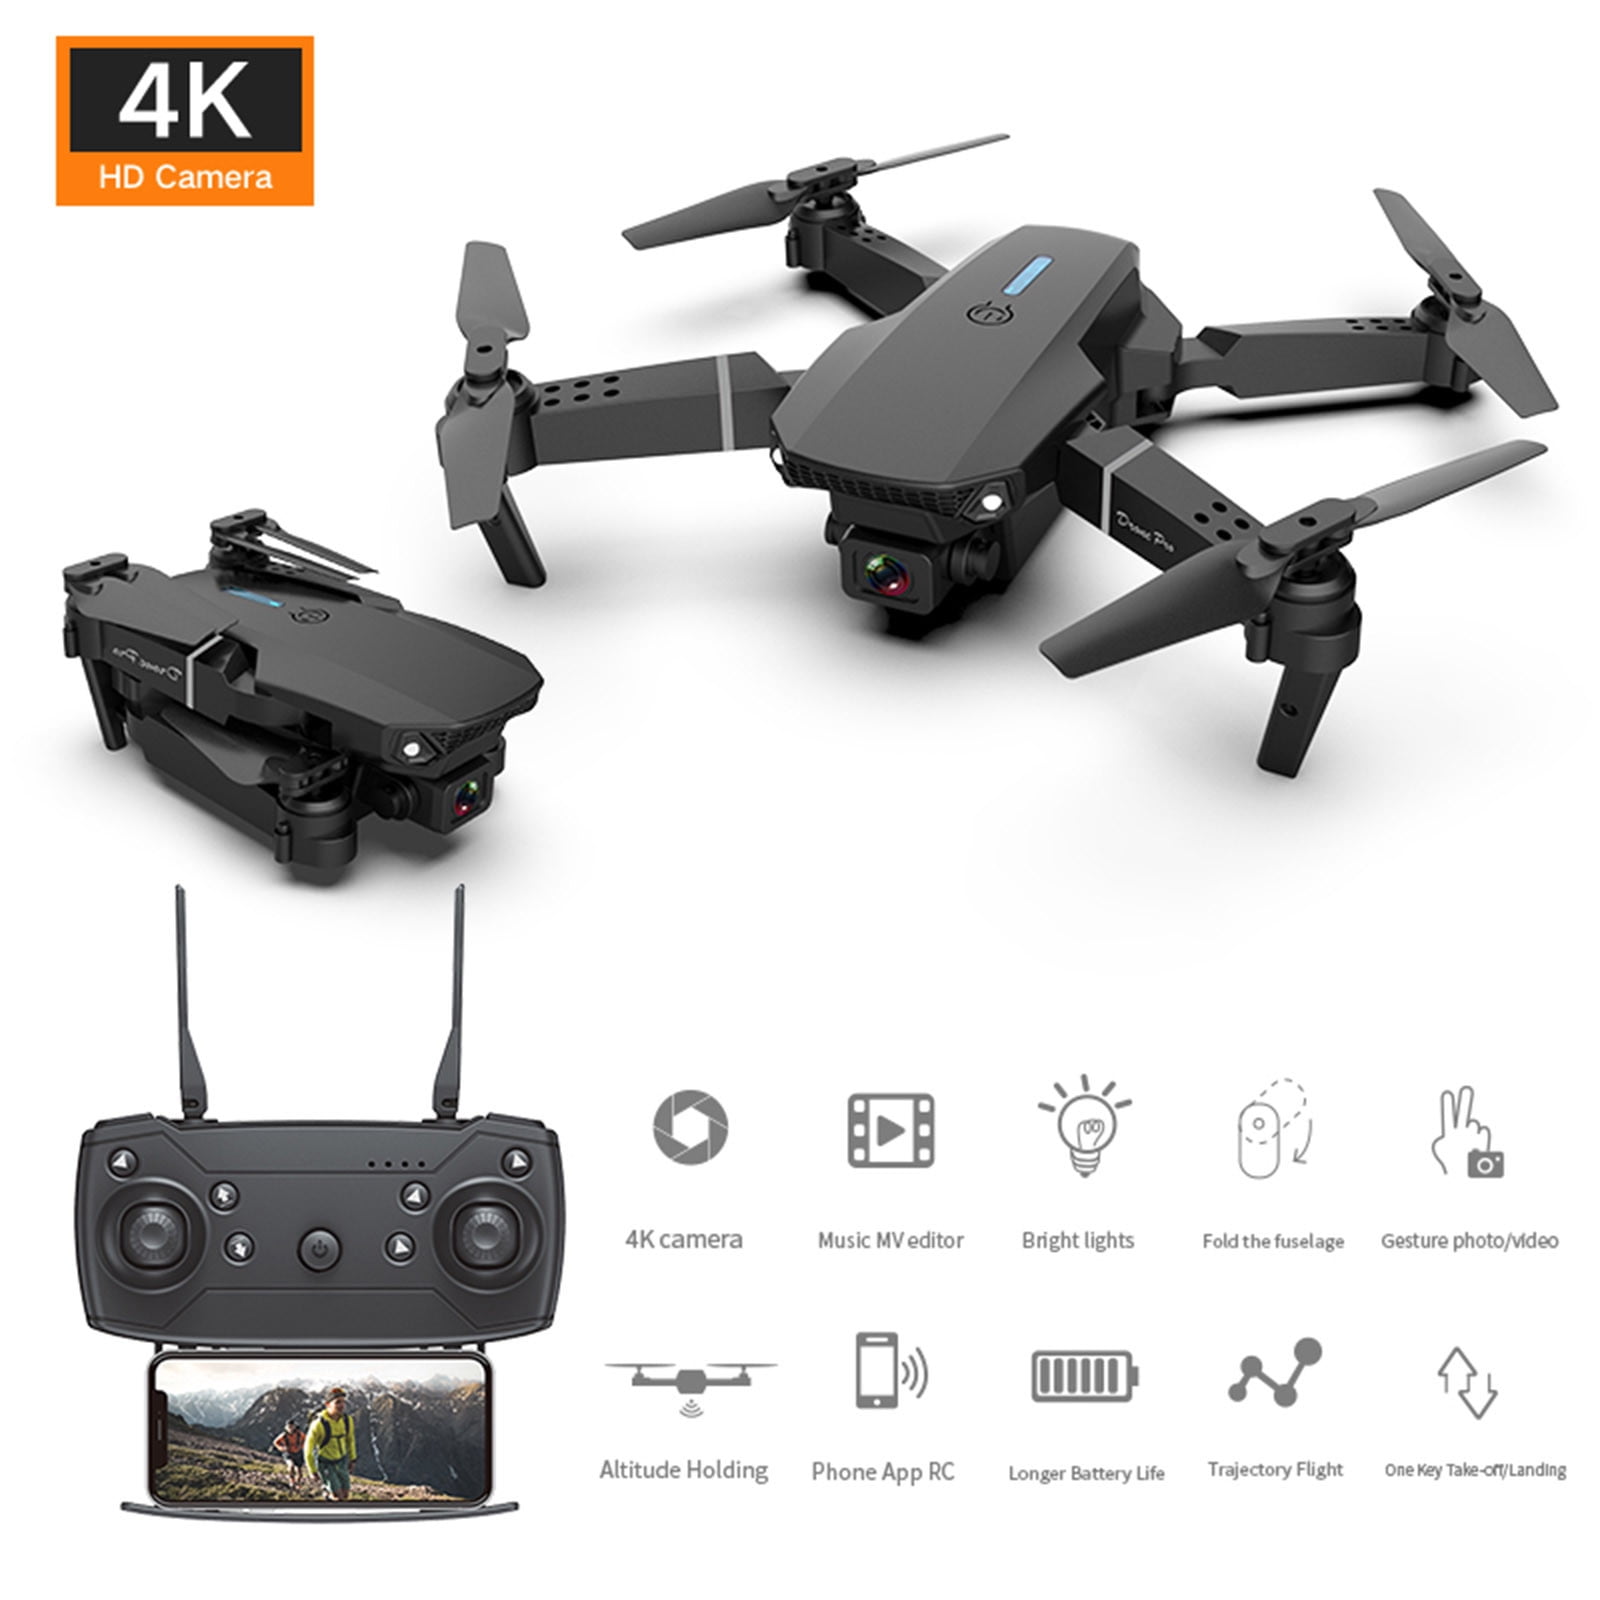 SDJMa Drones with Camera for Adults Foldable RC Quadcopter E88 Drone with  1080P HD Camera Mini Drone for Kids Gifts, WiFi FPV Live Video, Altitude